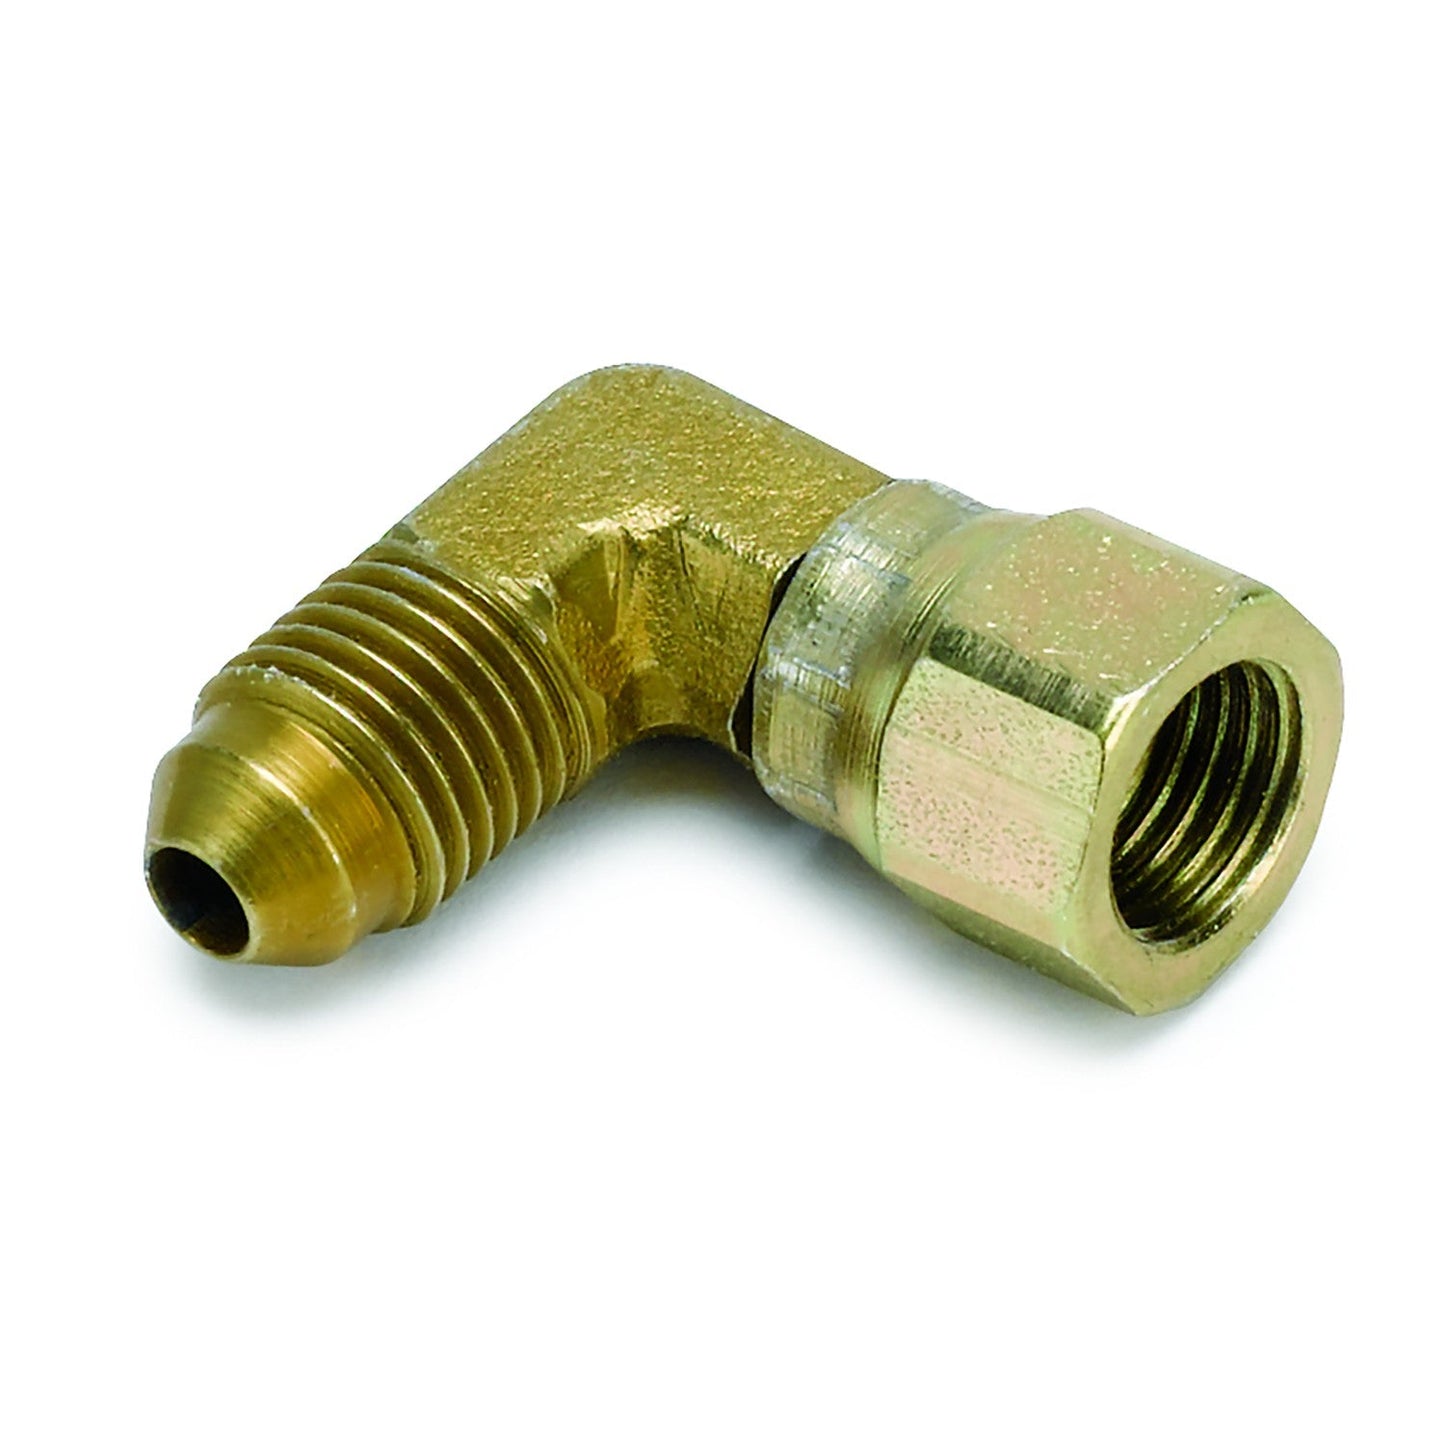 AutoMeter - FITTING, ADAPTER, 90 °, -4AN FEMALE TO -4AN MALE, STEEL (3274)